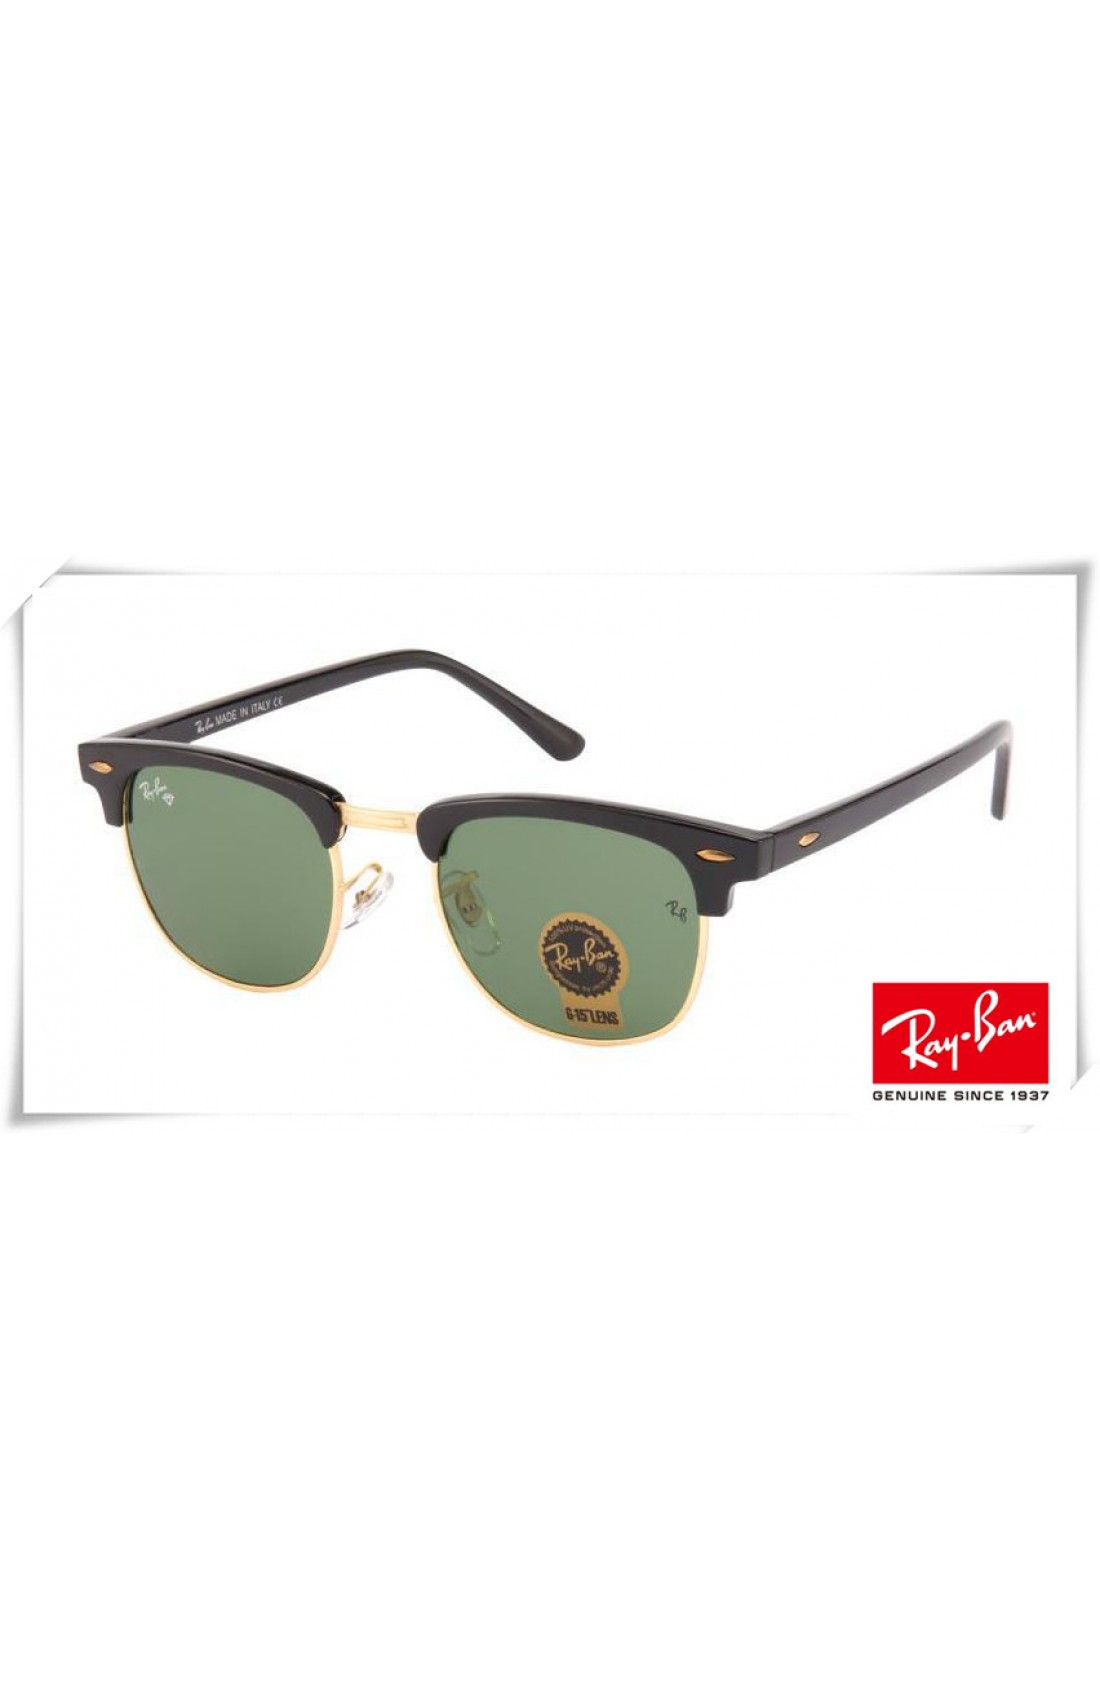 ray ban clubmaster best price